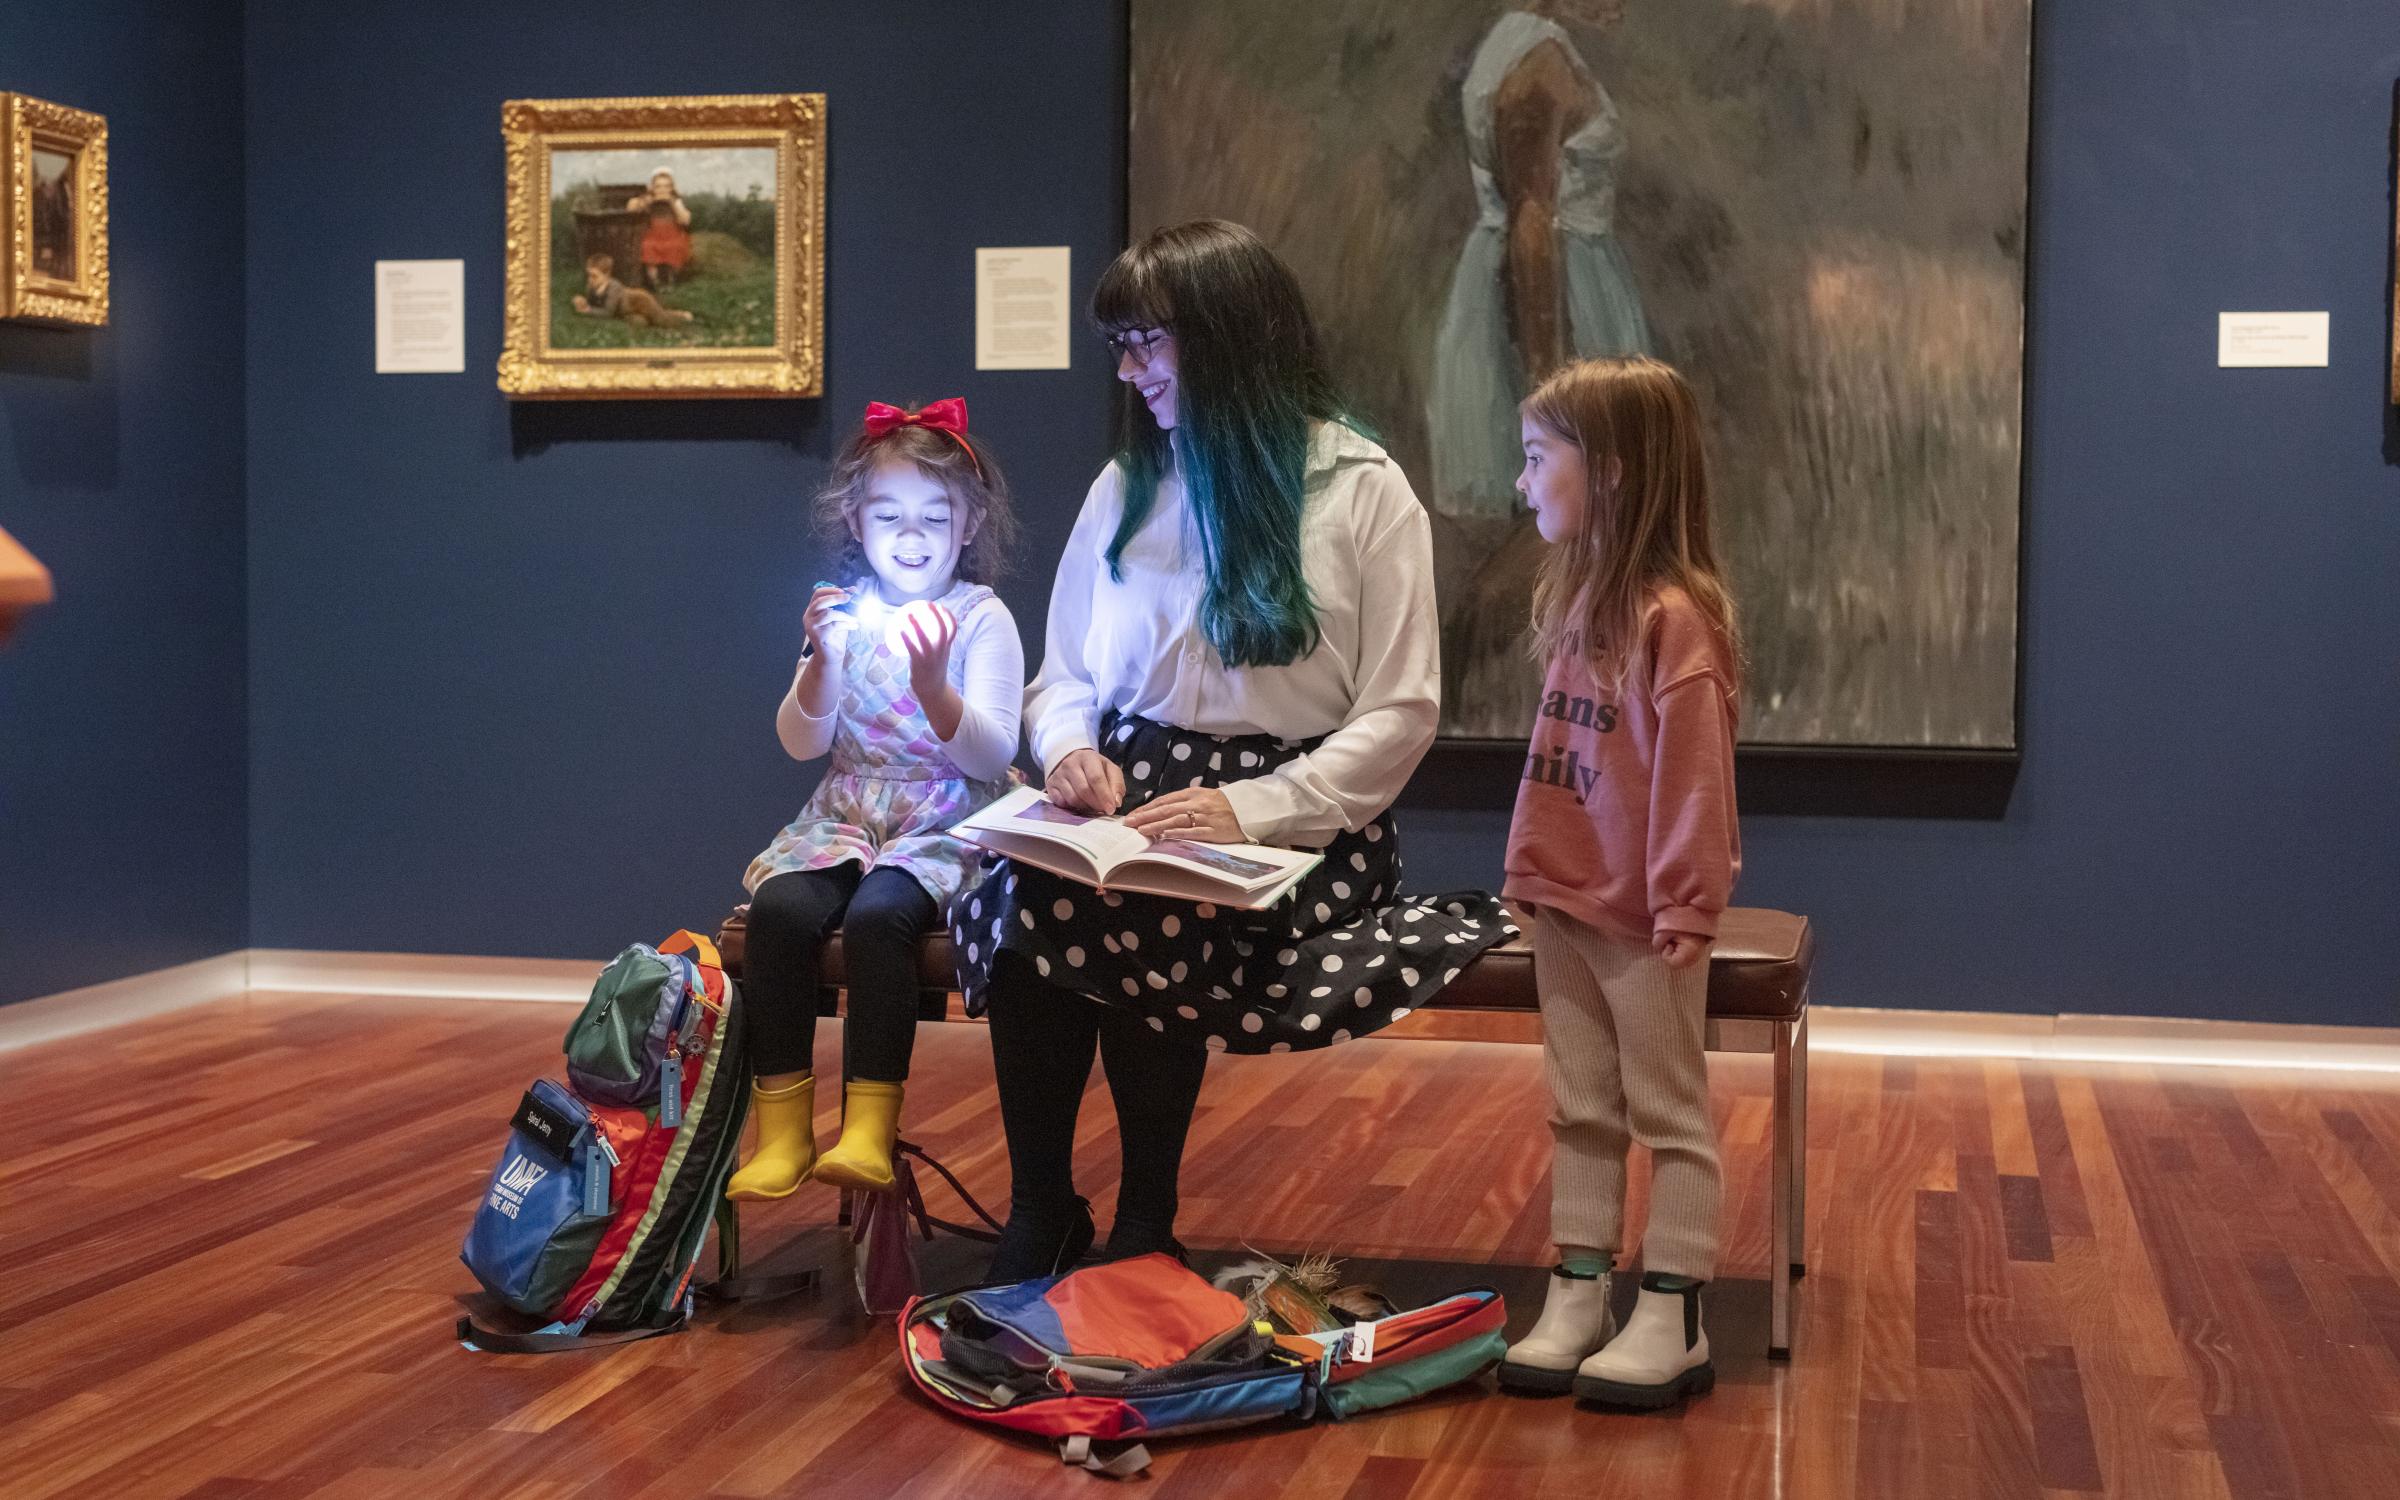 A family explores a gallery at UMFA with provided family backpacks to enhance their experience.